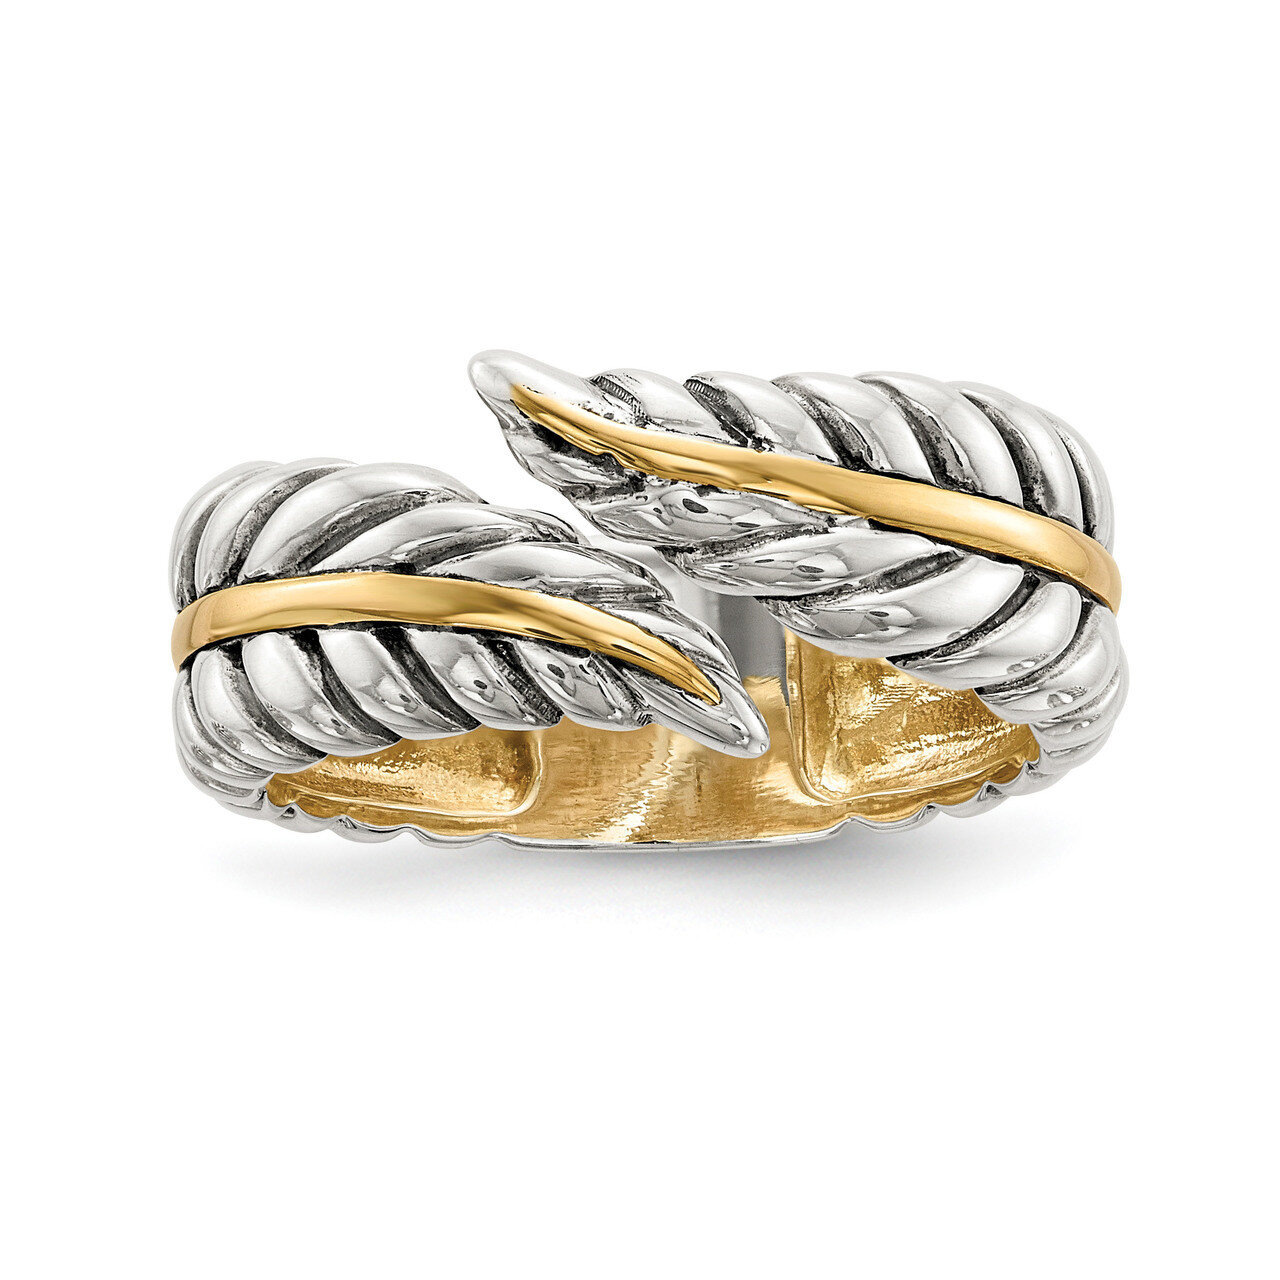 Antiqued Leaves Bypass Ring Sterling Silver with 14k Gold QR6611